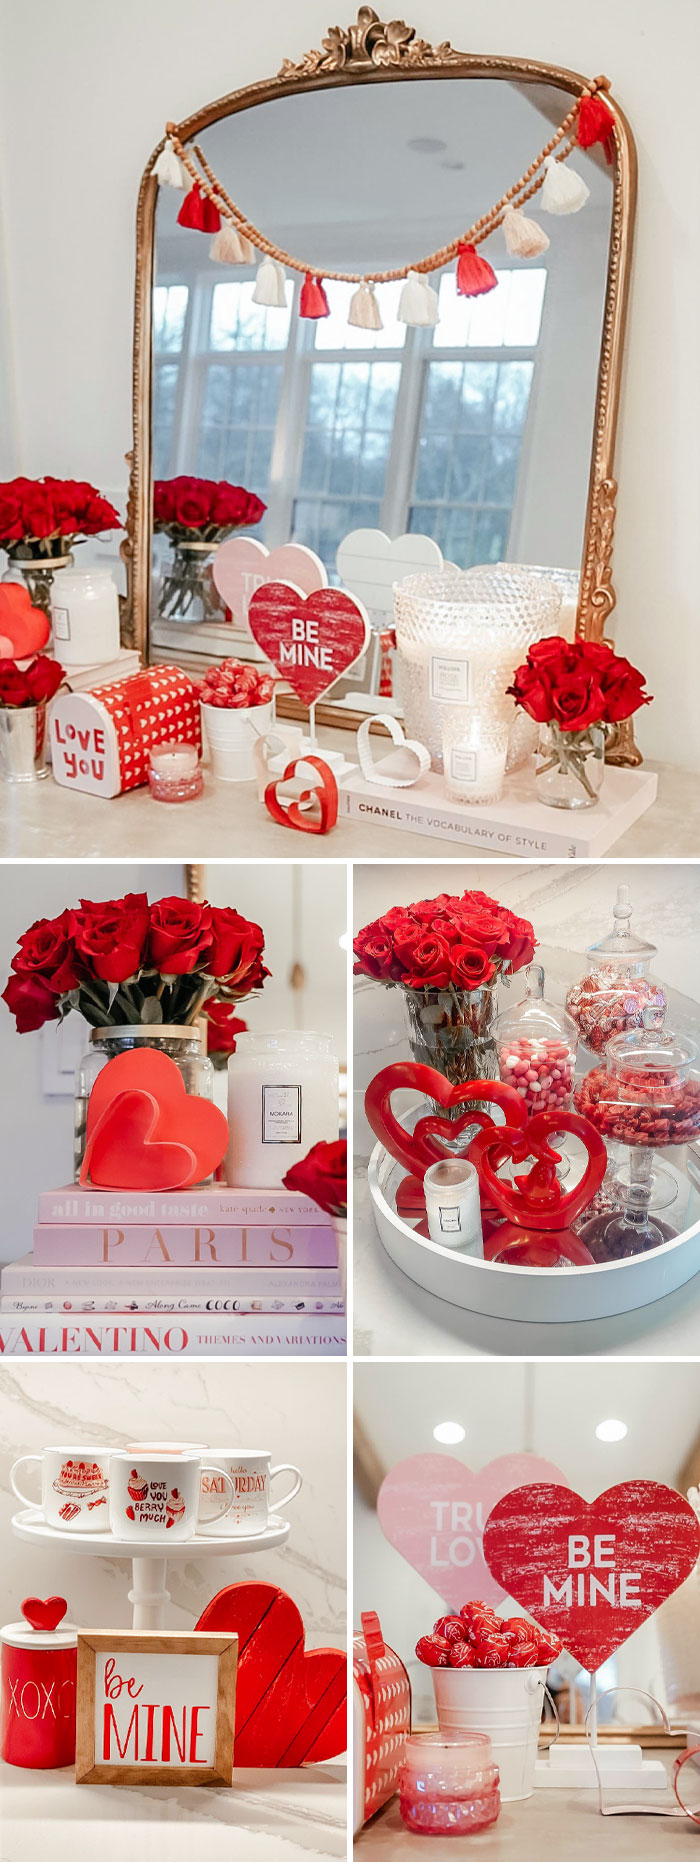 My Valentine's Day Decor. I Am Going To Try And Get Something Lovey And Heartsy Up Later This Afternoon To Set The Love Vibe In The House